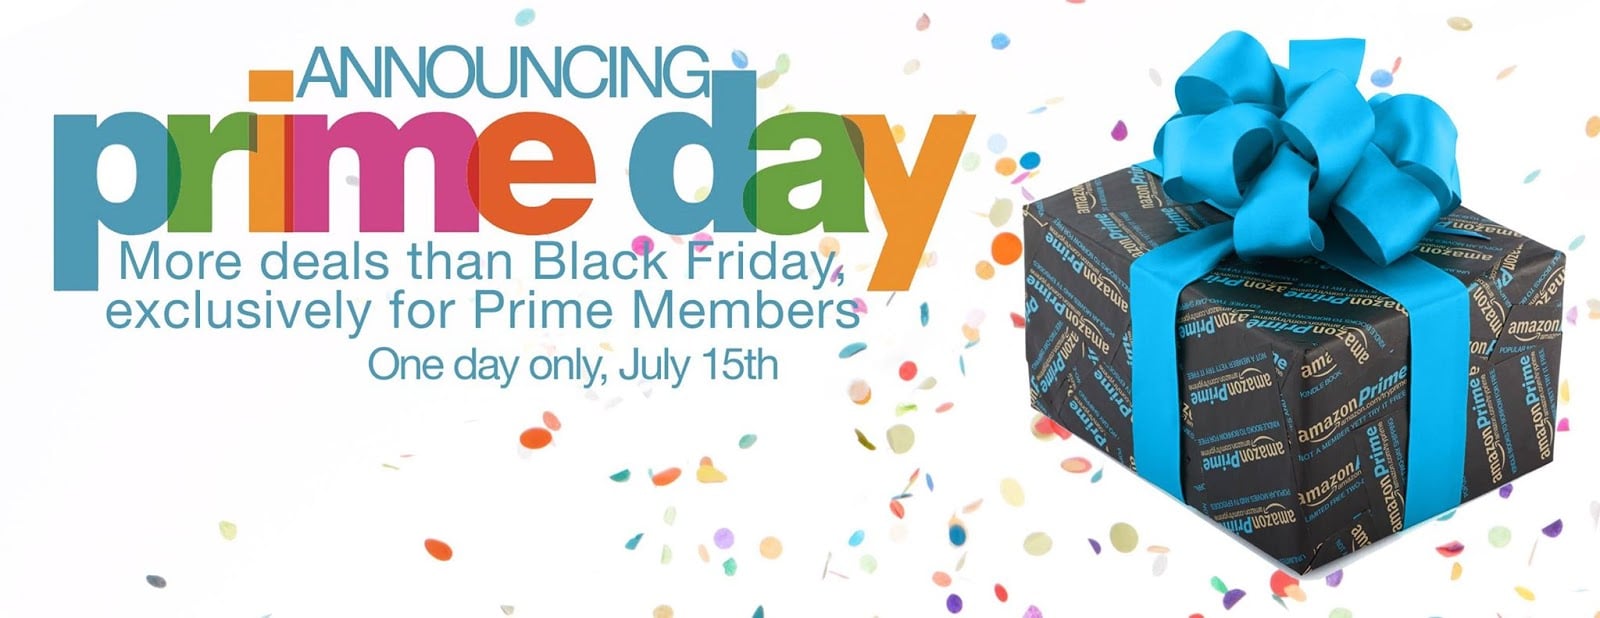 prime day promotional poster